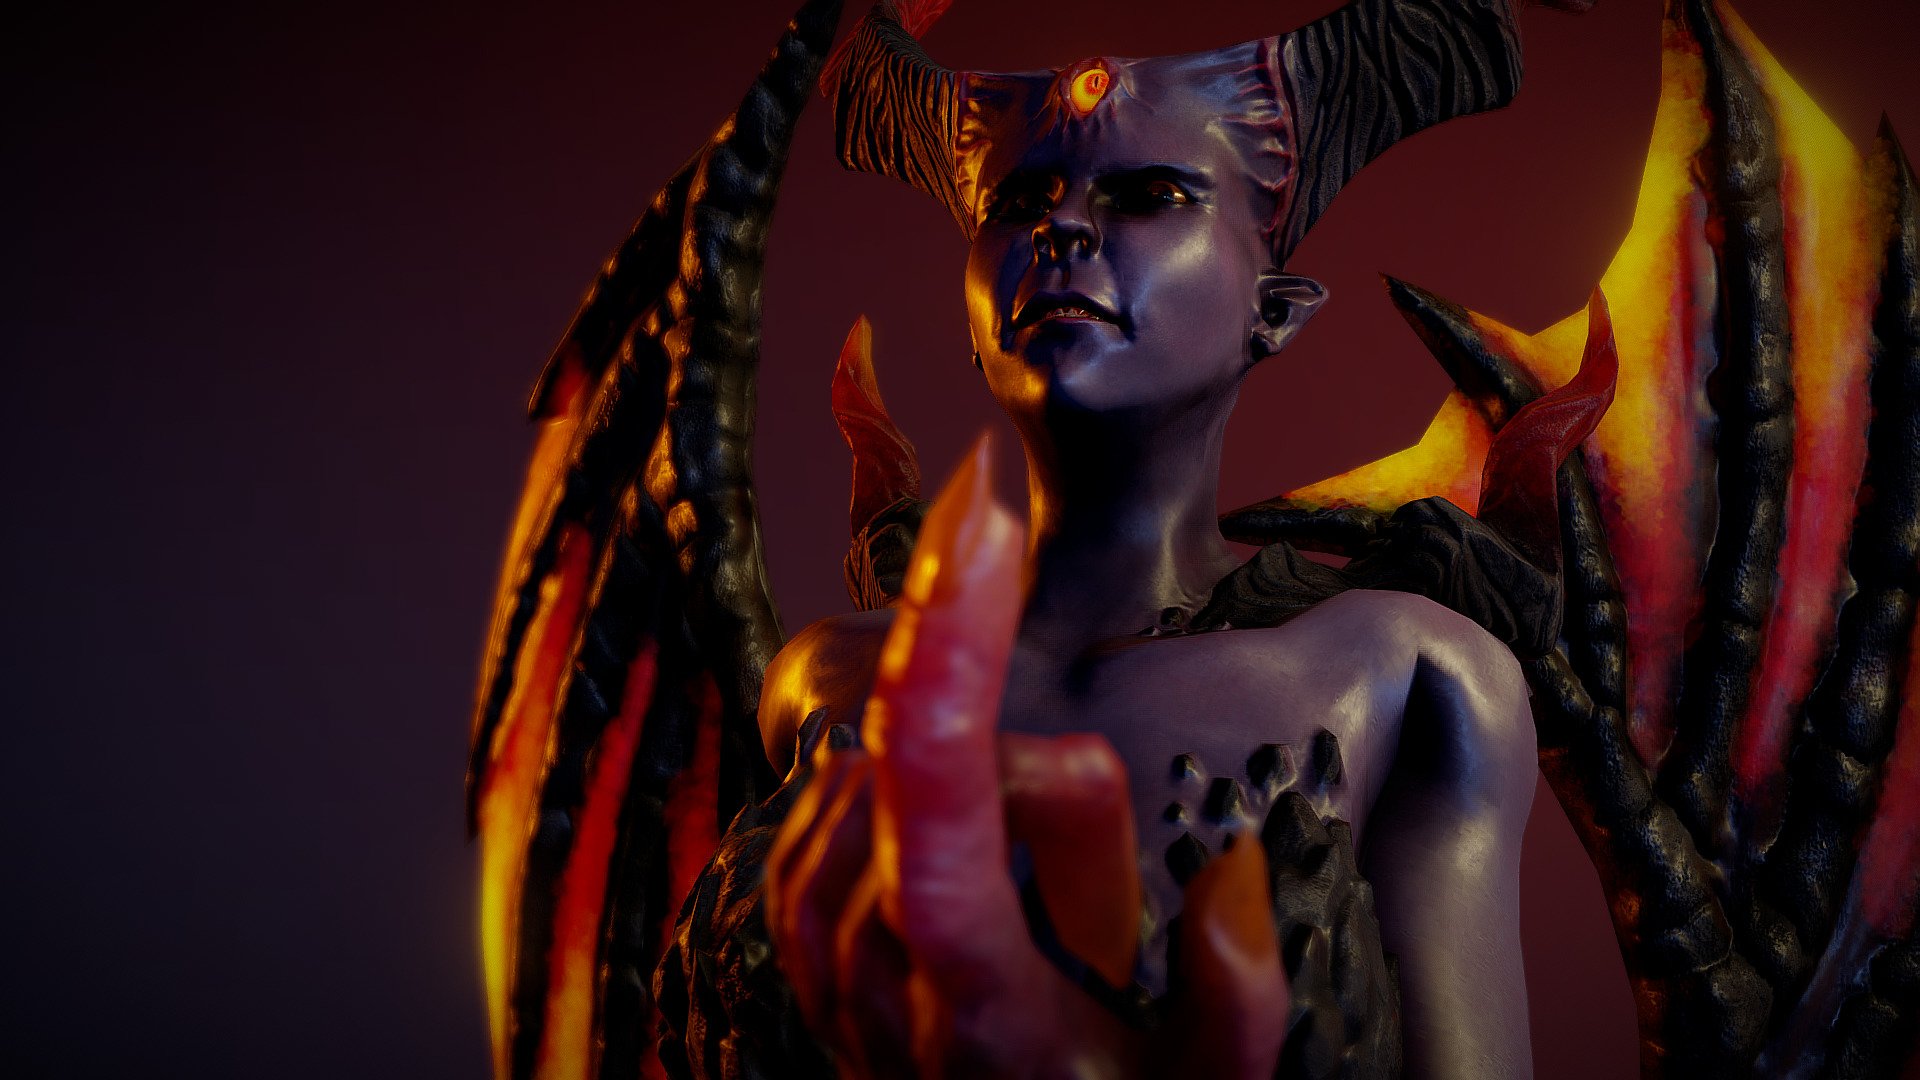 High Quality Succubus Demon models with rig and 10 animations ready to be used in your pUnity3D and Unreal Engine 4 projects.



Model is 13,850 tris. PBR materials with several texture sizes are used.




Textures:

4096x4096 (5)

512x512 (3)

256x256 (1)




Animations:

Idle 1

Idle 2

Idle 3

Walk

Teleport

Attack 1

Attack 2

Attack 3

Attack 4

Dead - Succubus - Buy Royalty Free 3D model by willpowaproject 3d model